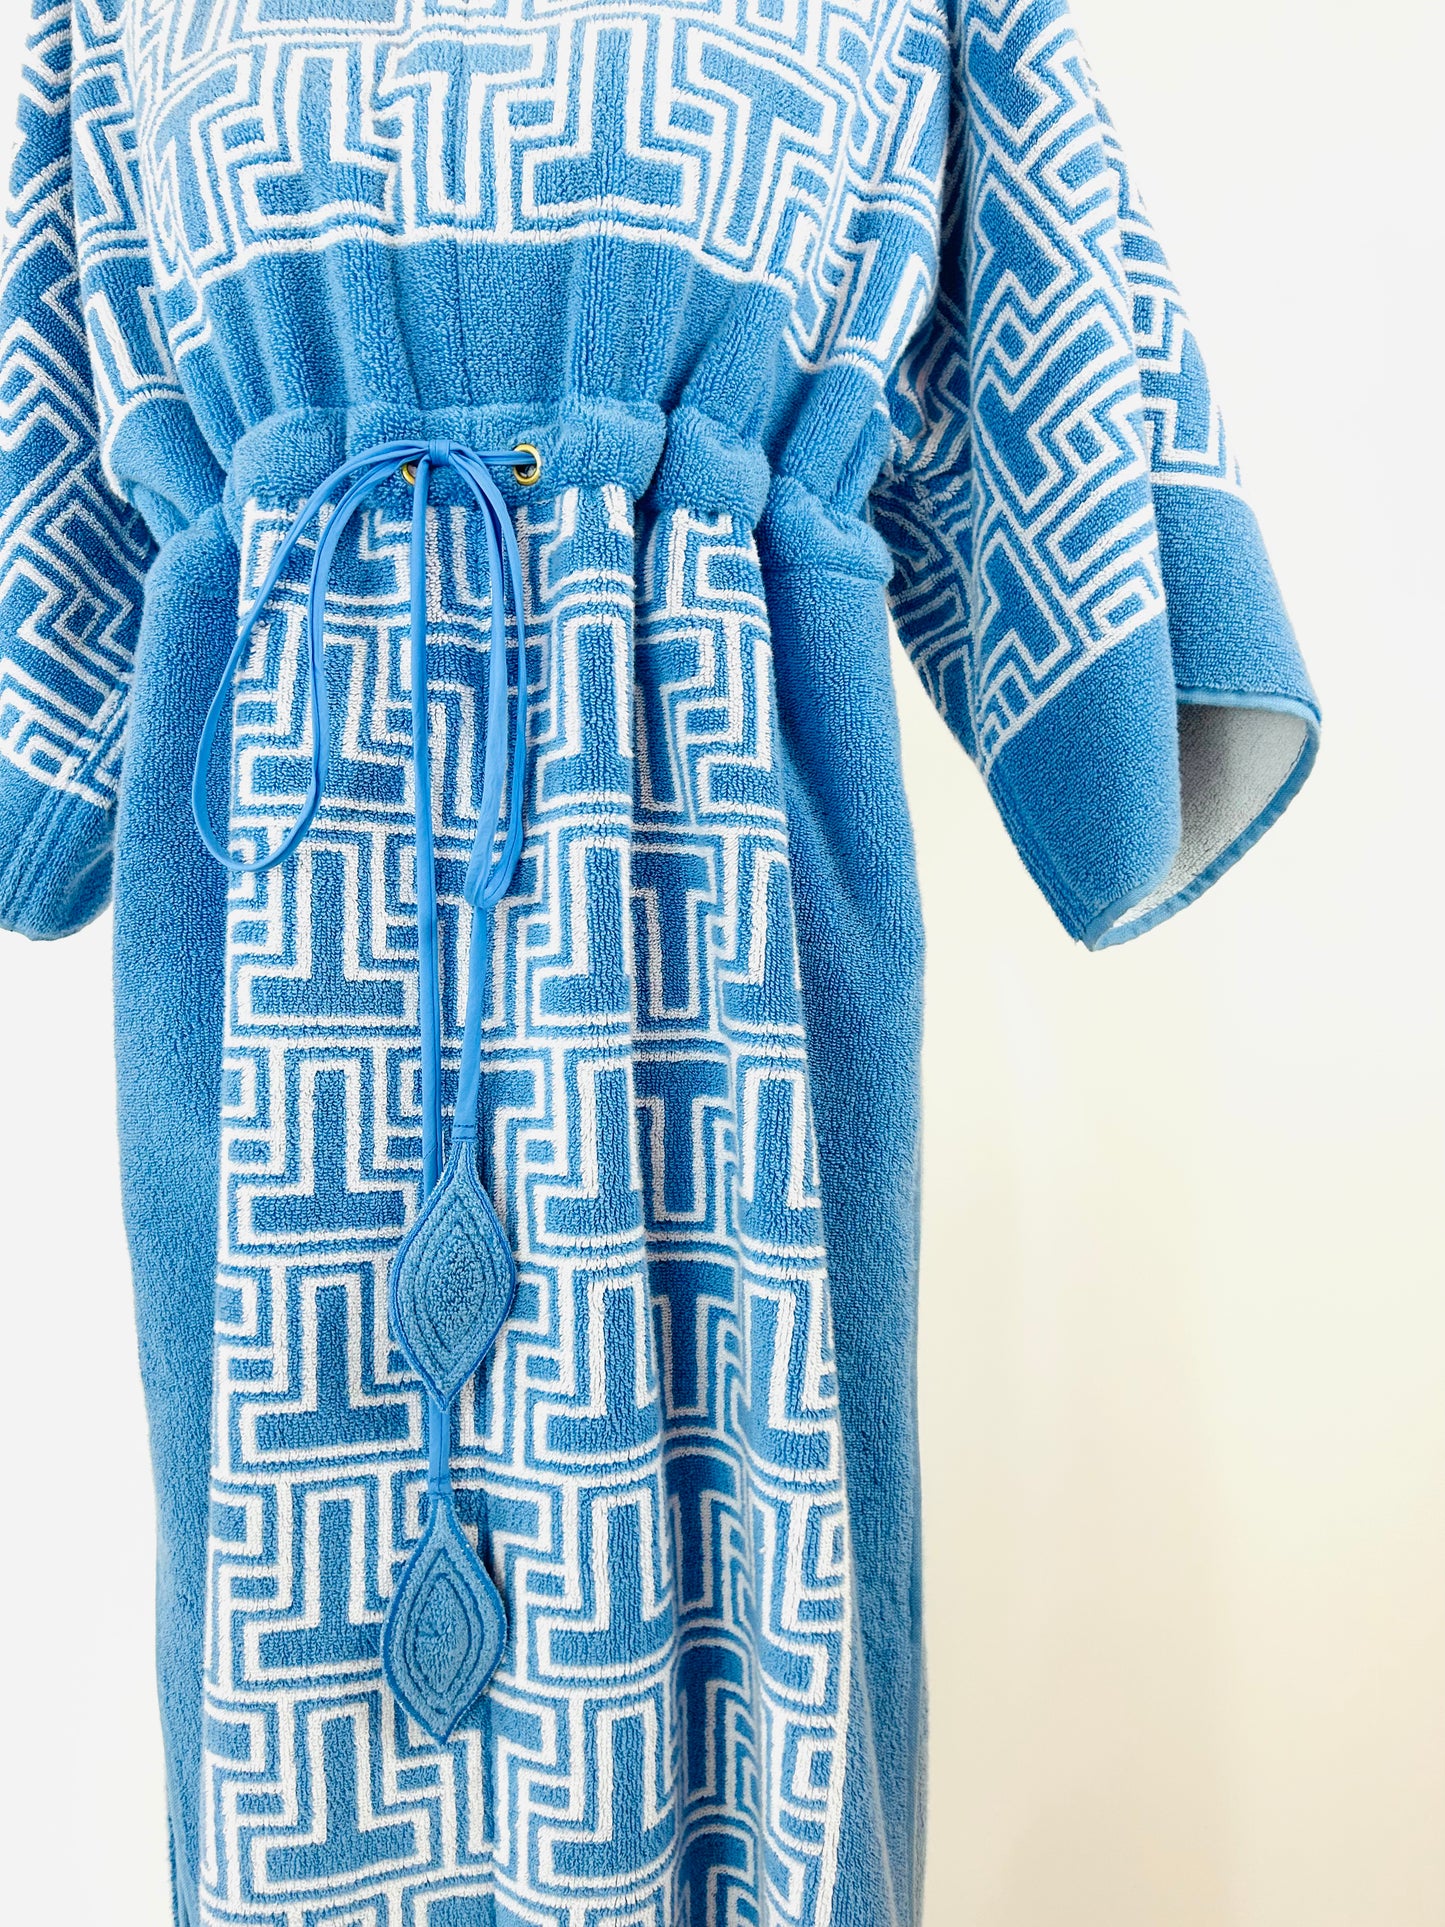 Tory Burch Blue and White Towel Dress